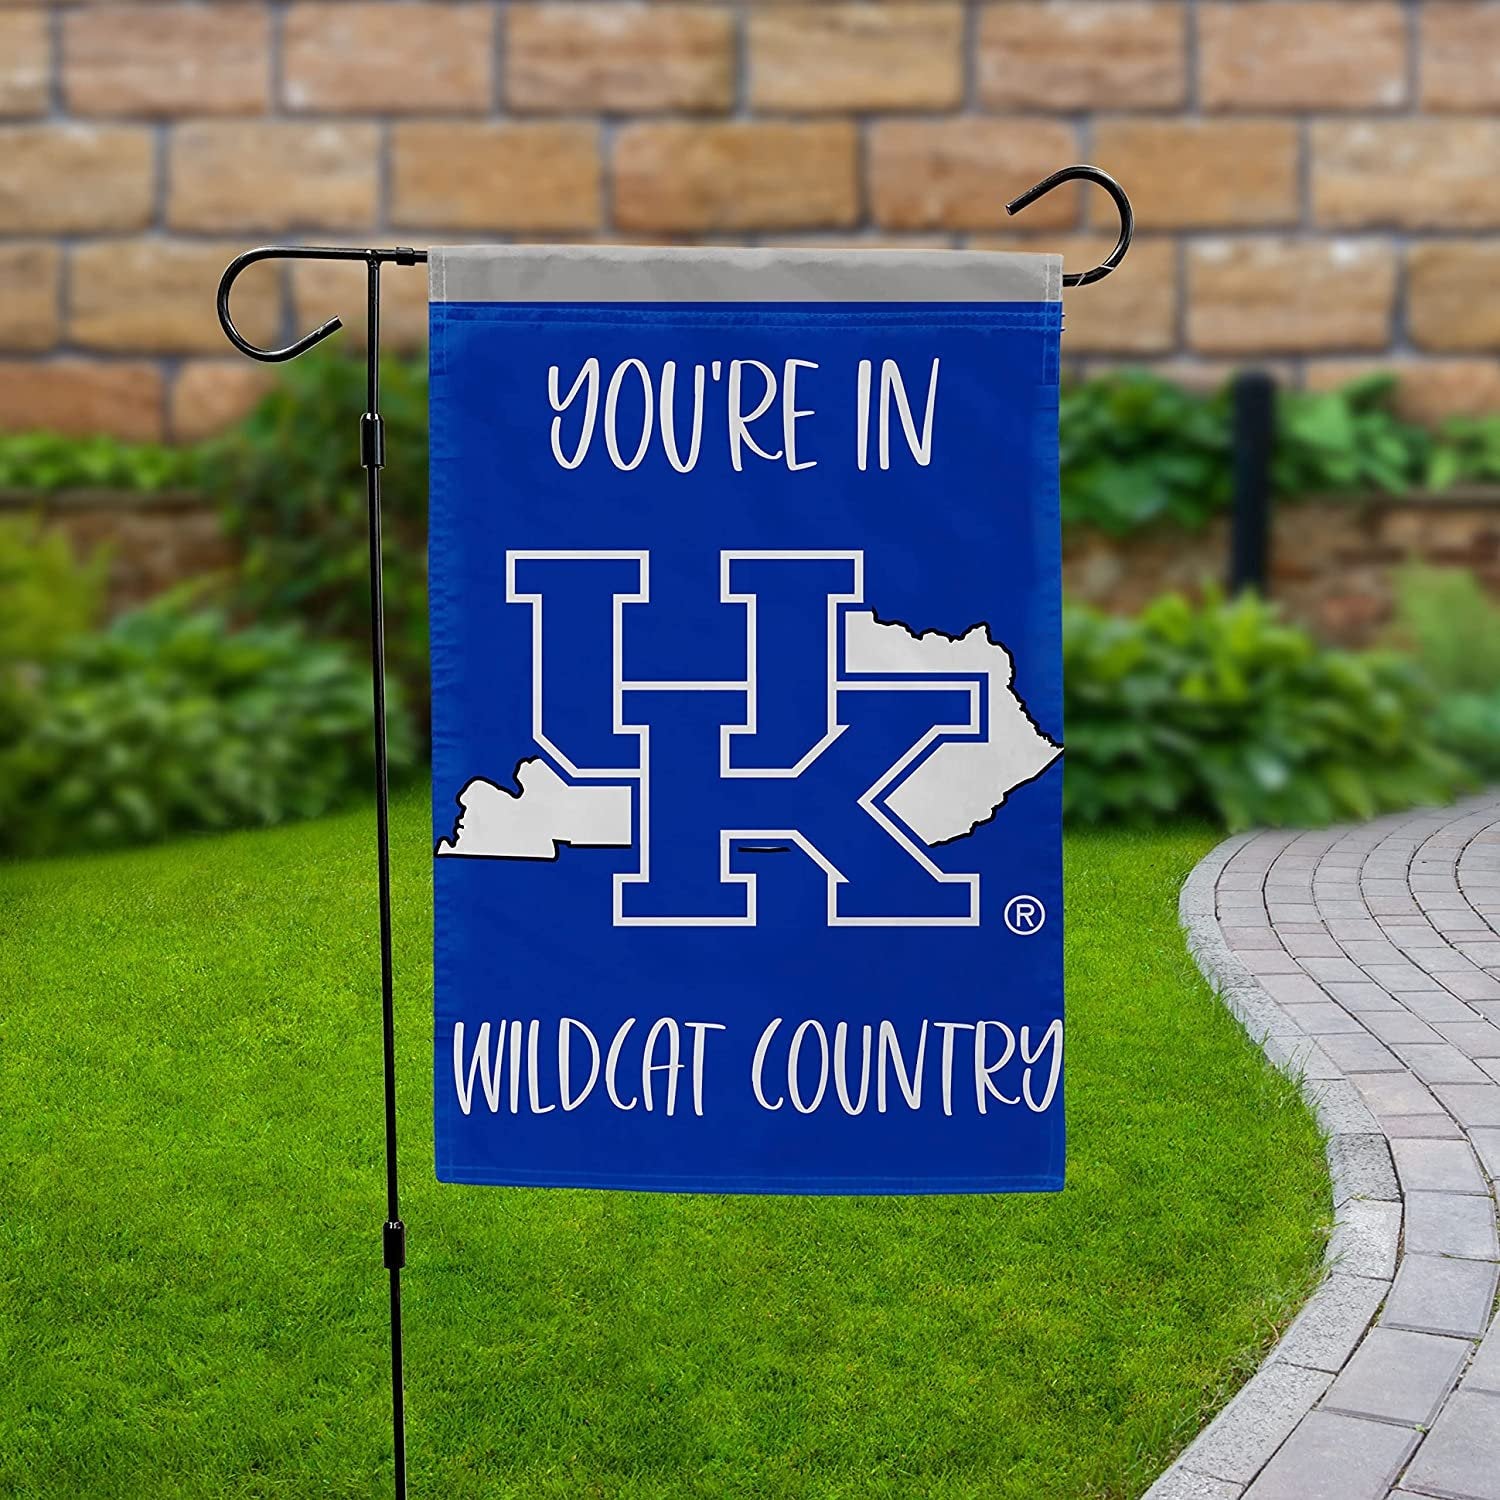 University of Kentucky Wildcats Double Sided Garden Flag Banner 12x18 Inch Country Design